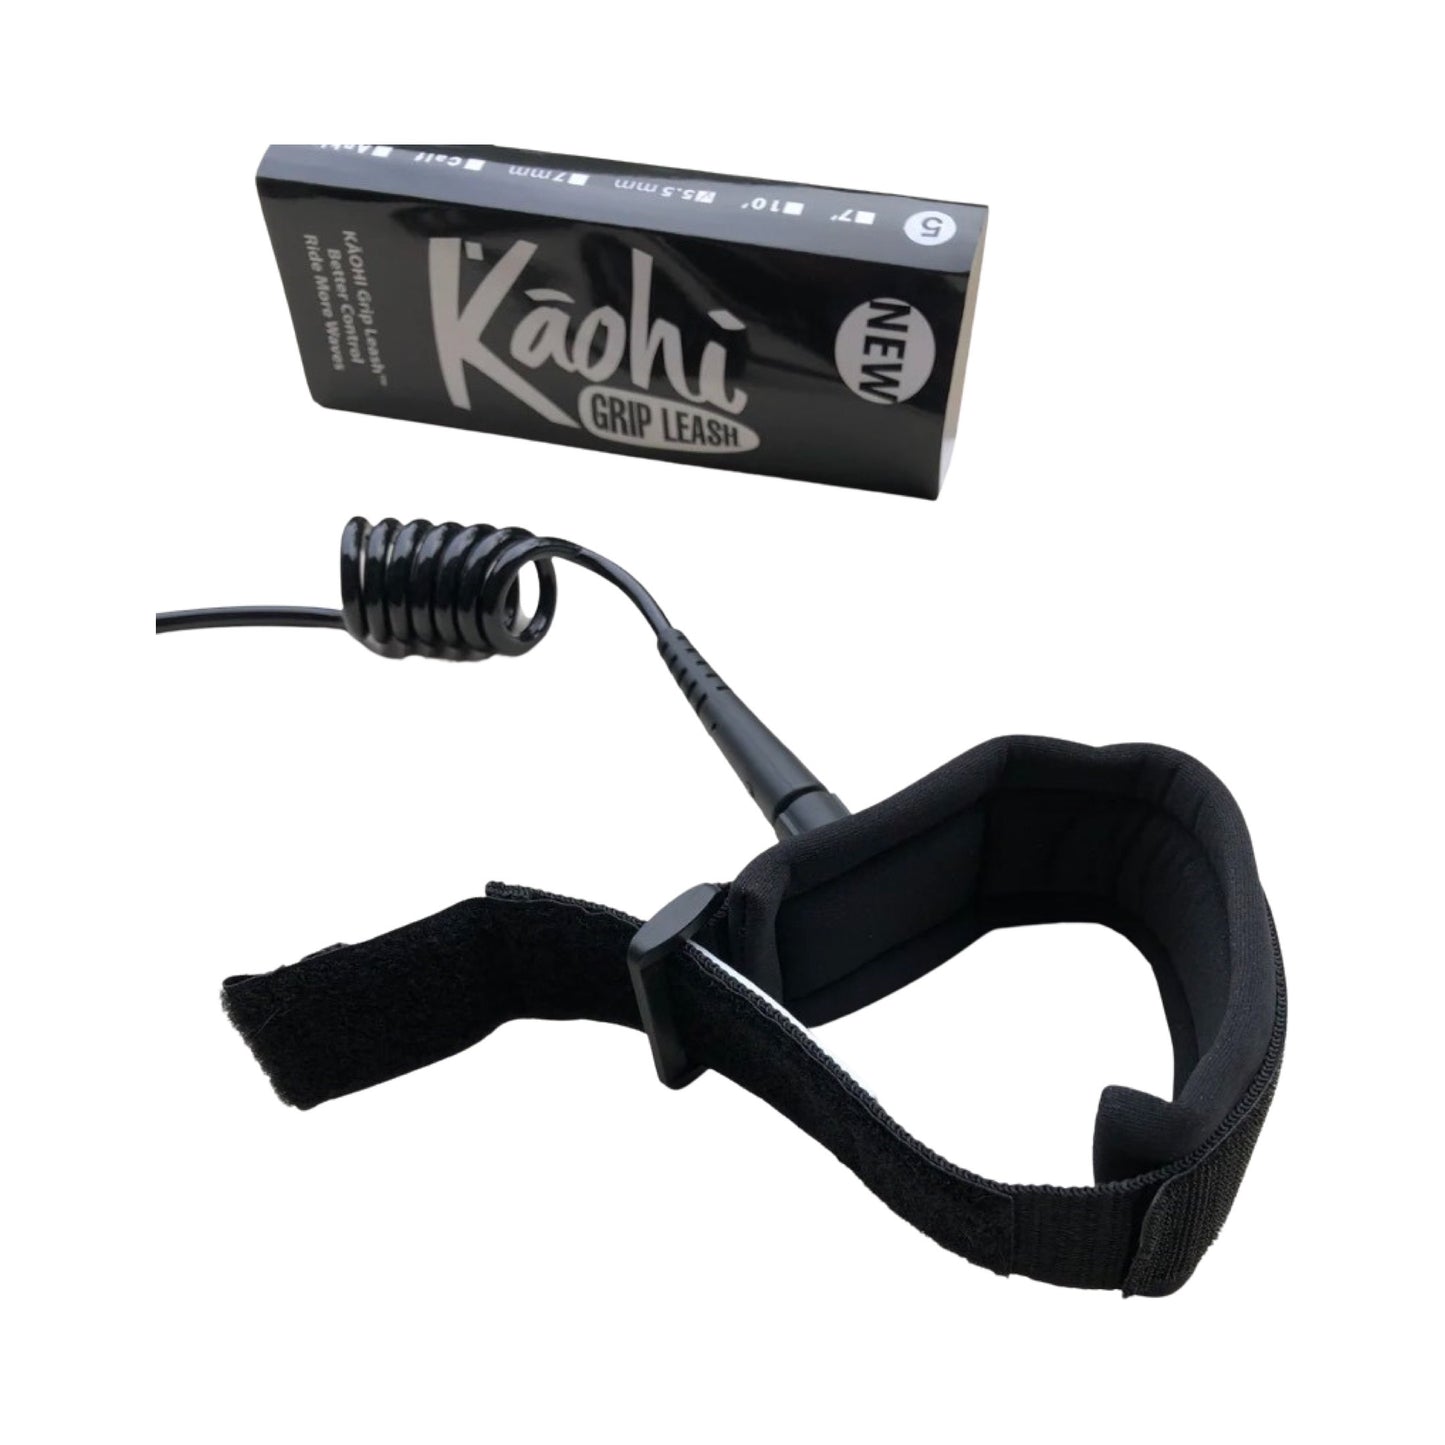 Kaohi - DISCONTINUED- Replaced by COBRA FOIL LEASH